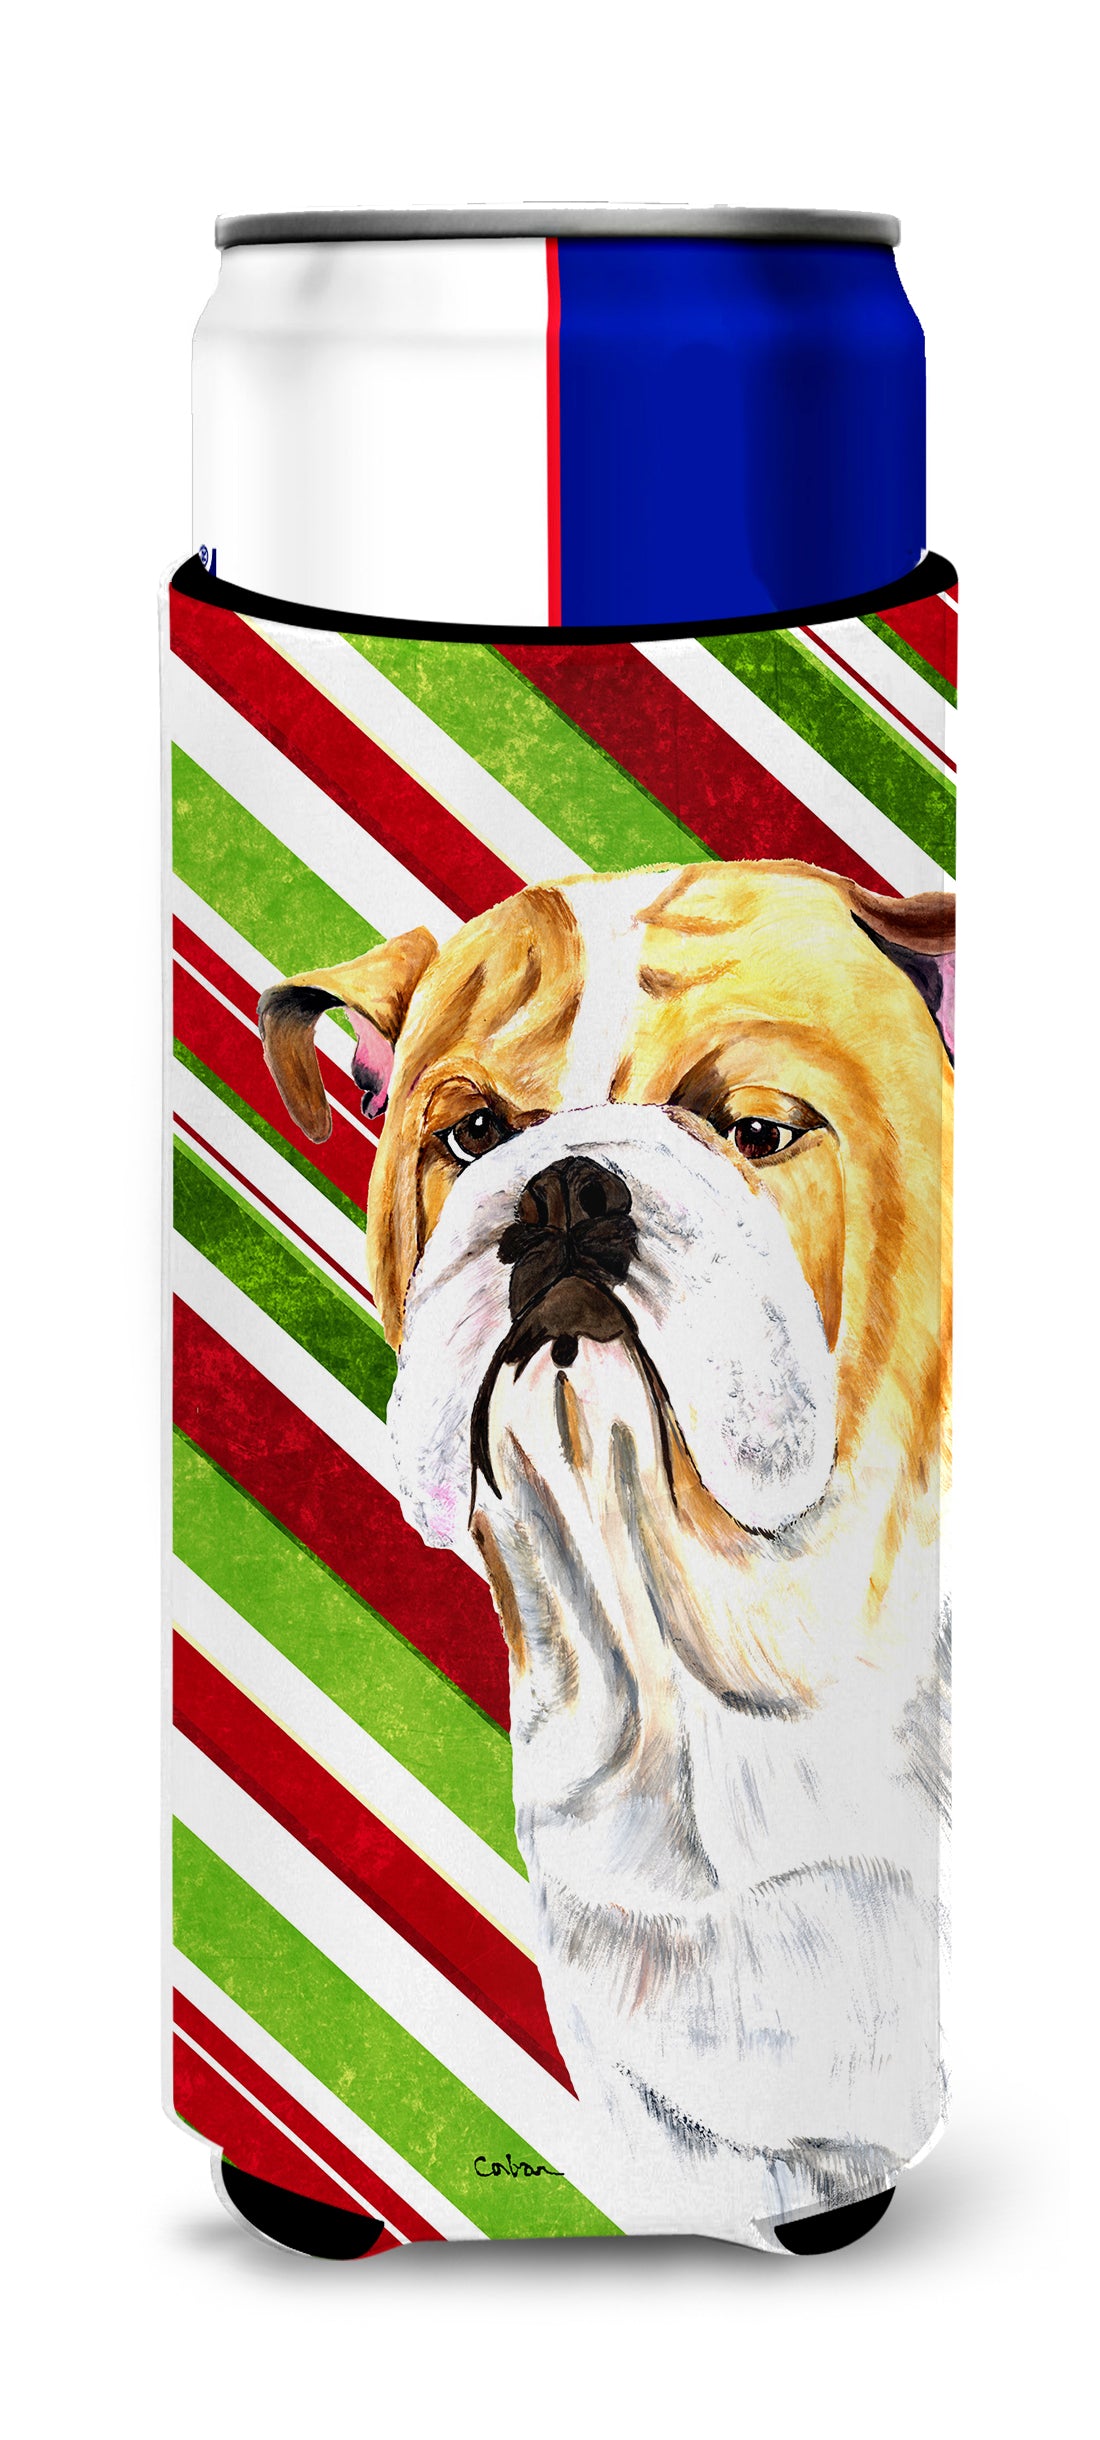 Bulldog English Candy Cane Holiday Christmas Ultra Beverage Insulators for slim cans SC9334MUK